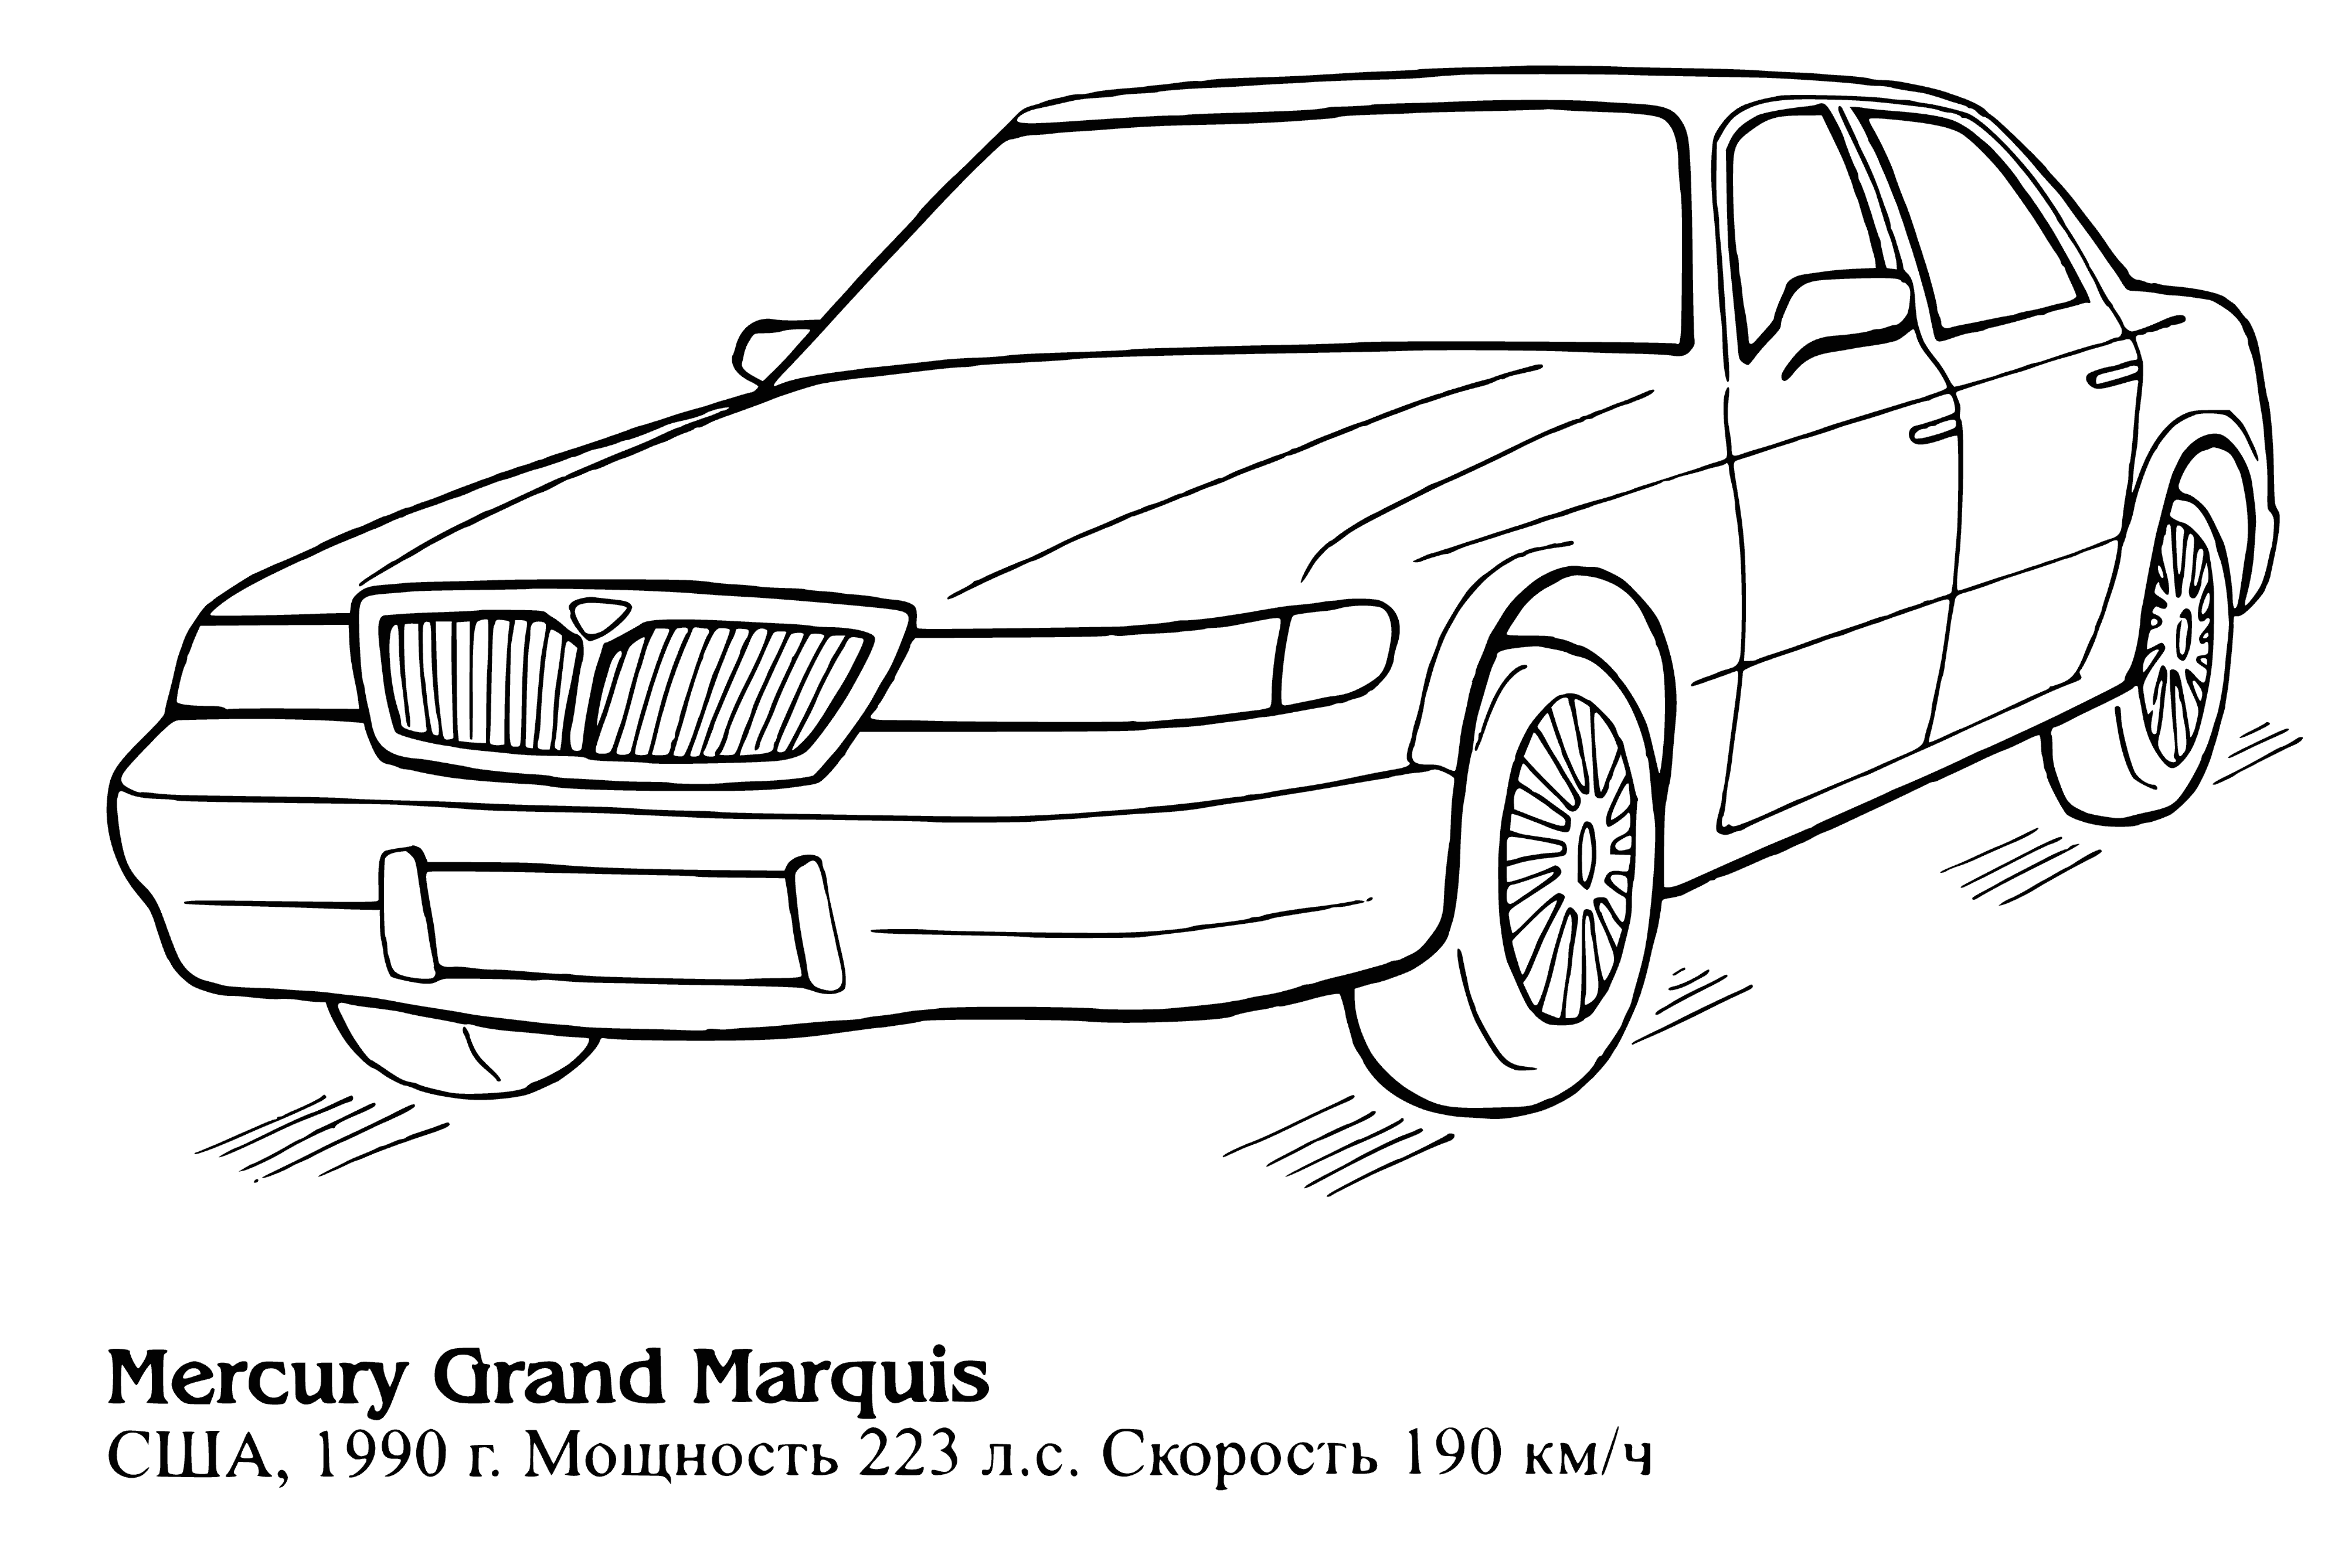 Mercury Grand Marquls coloring page